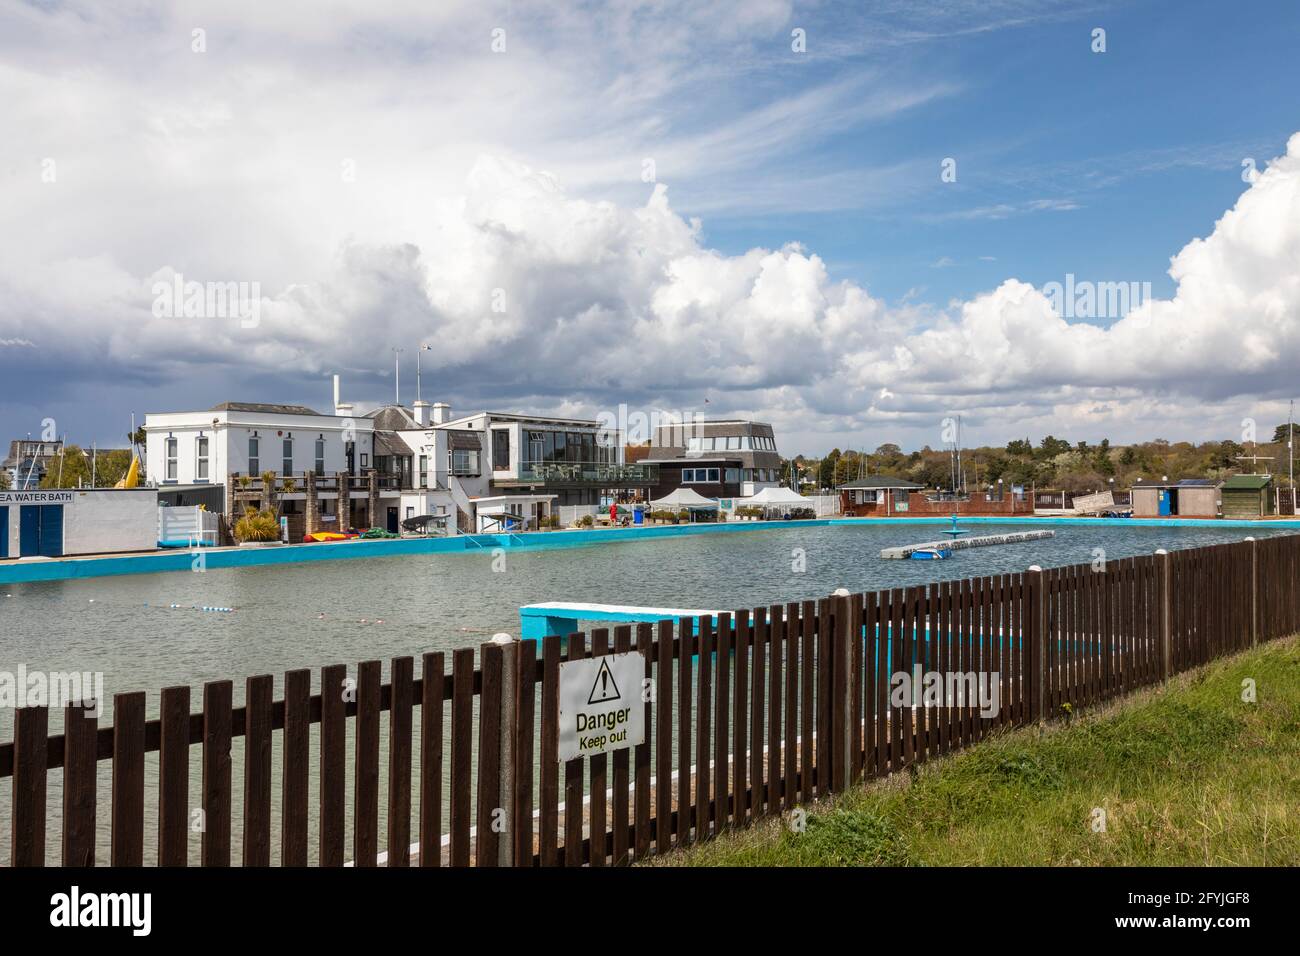 Lymington Sea Water Baths. The oldest open air natural swimming pool in the UK. Lymington, Hampshire, England, UK Stock Photo